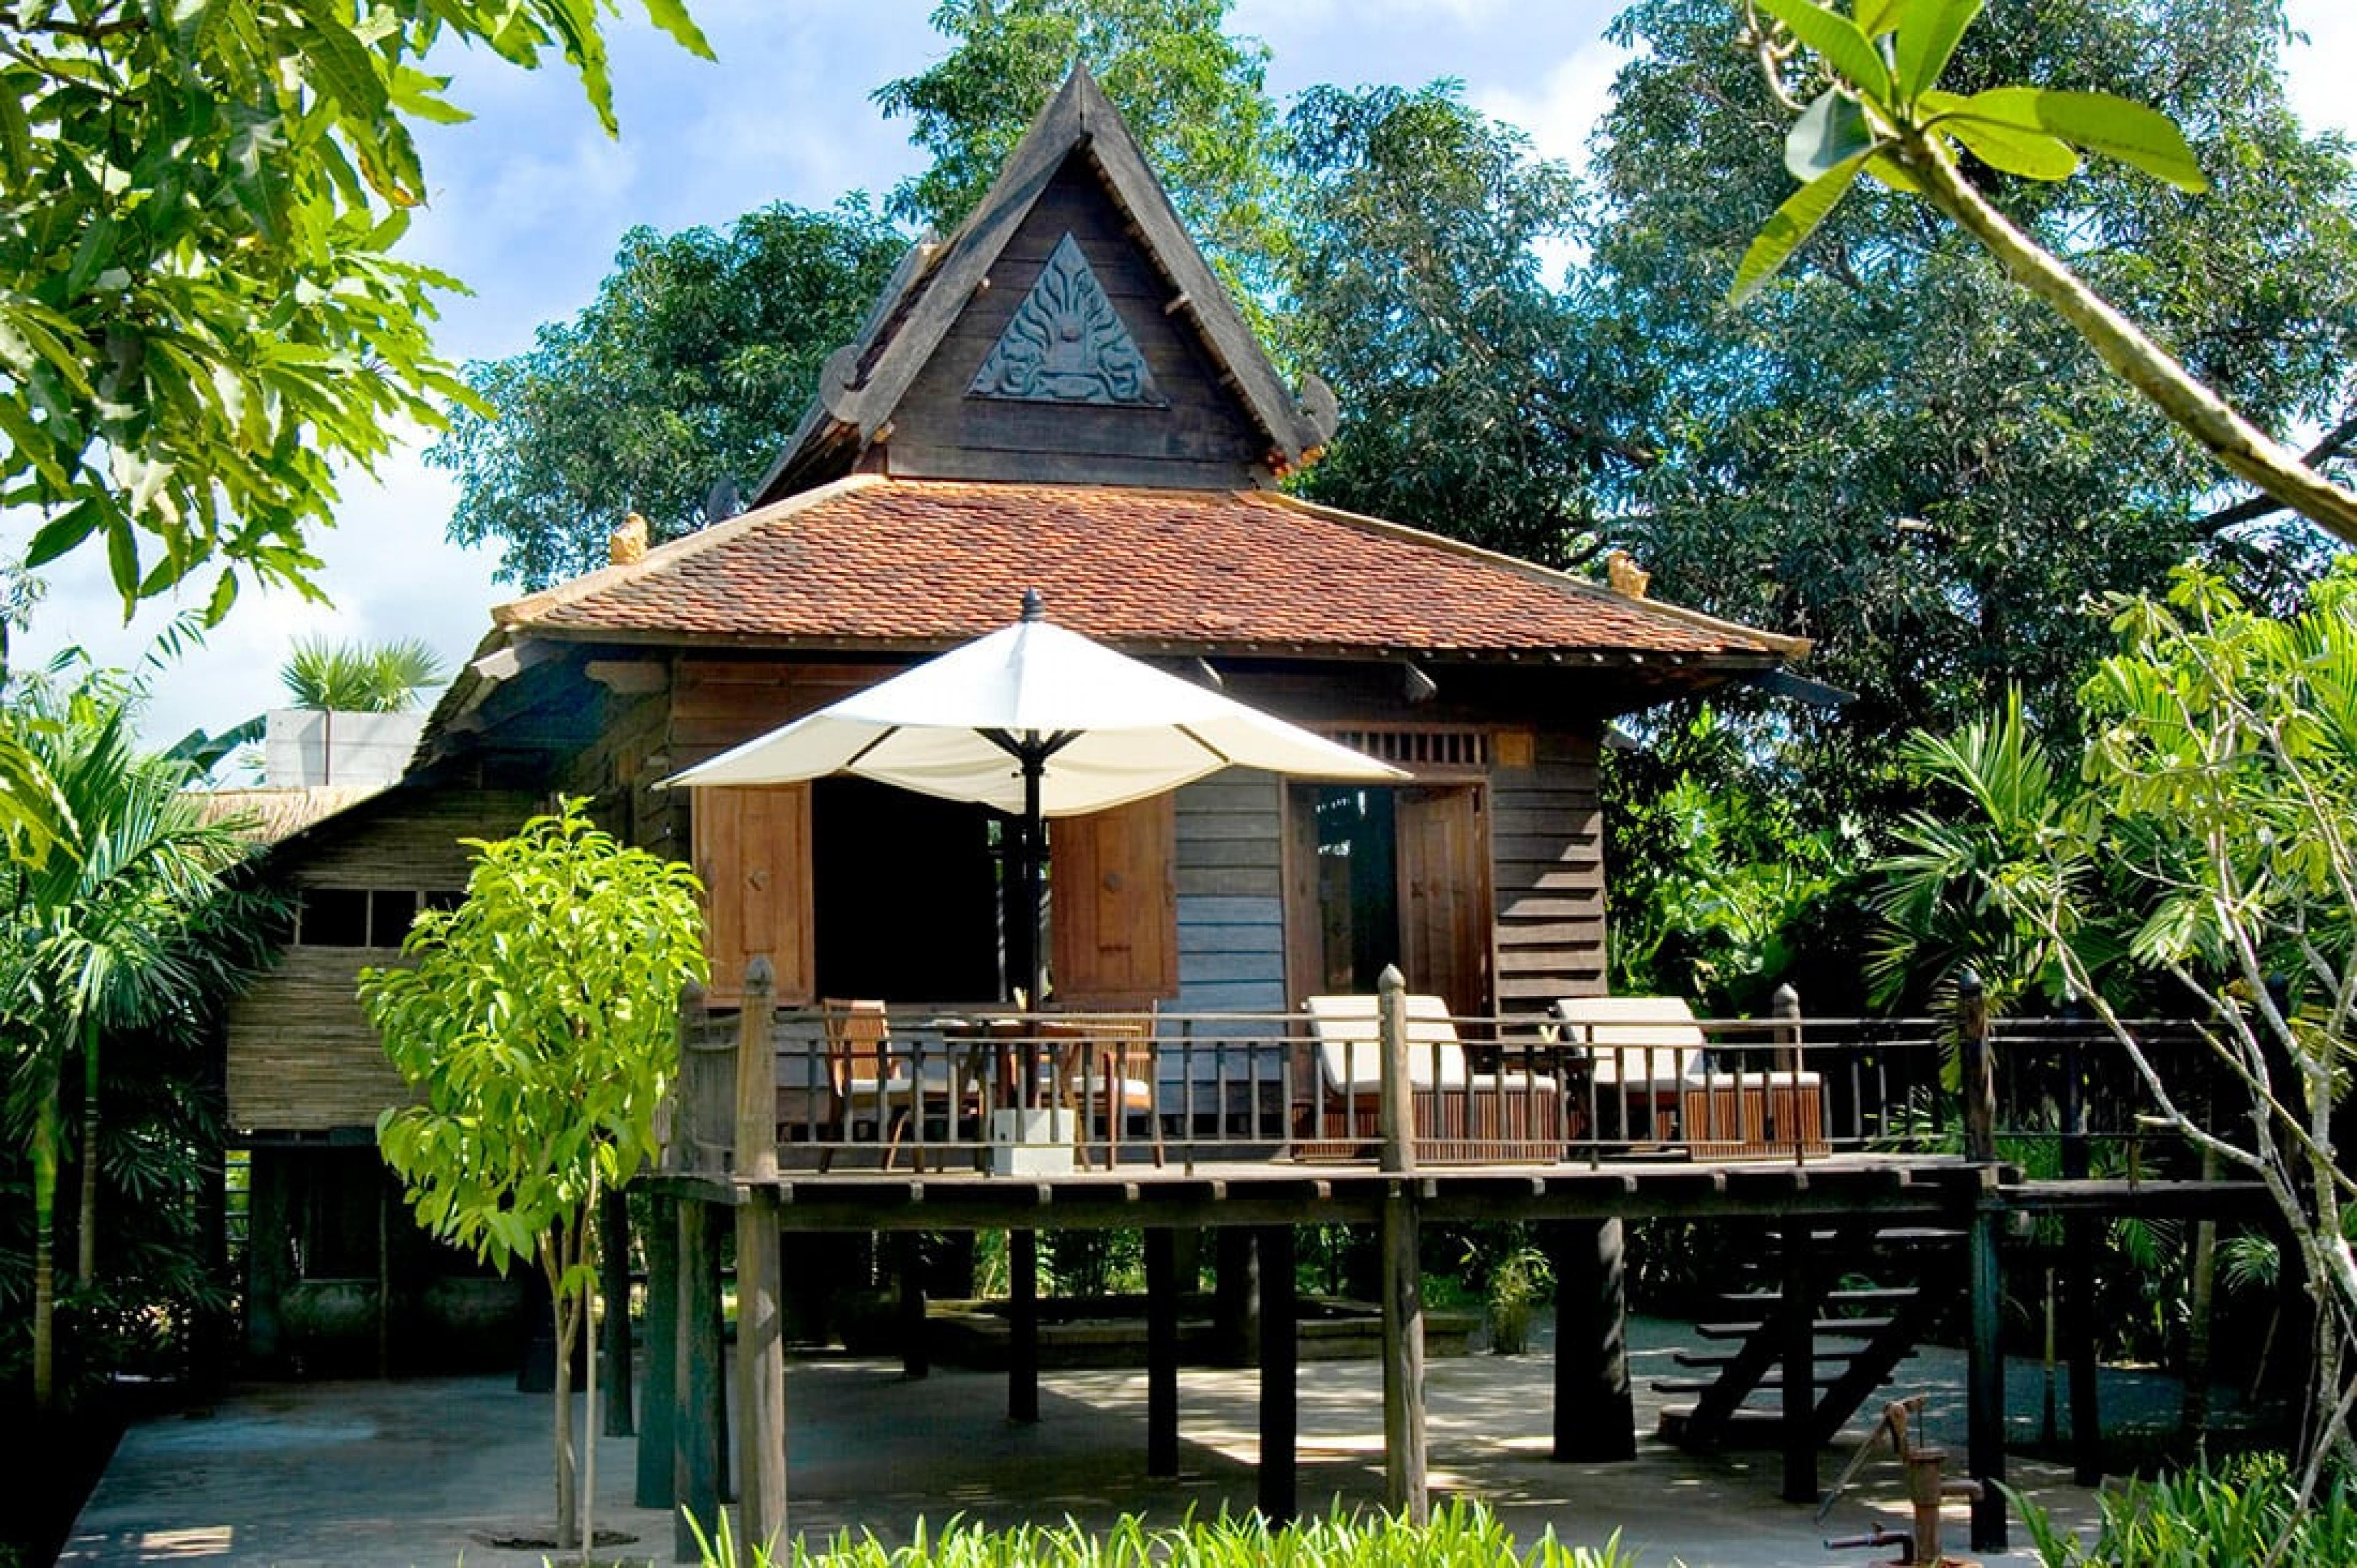 khmer style house with pointed roof and wooden terrace in daytime